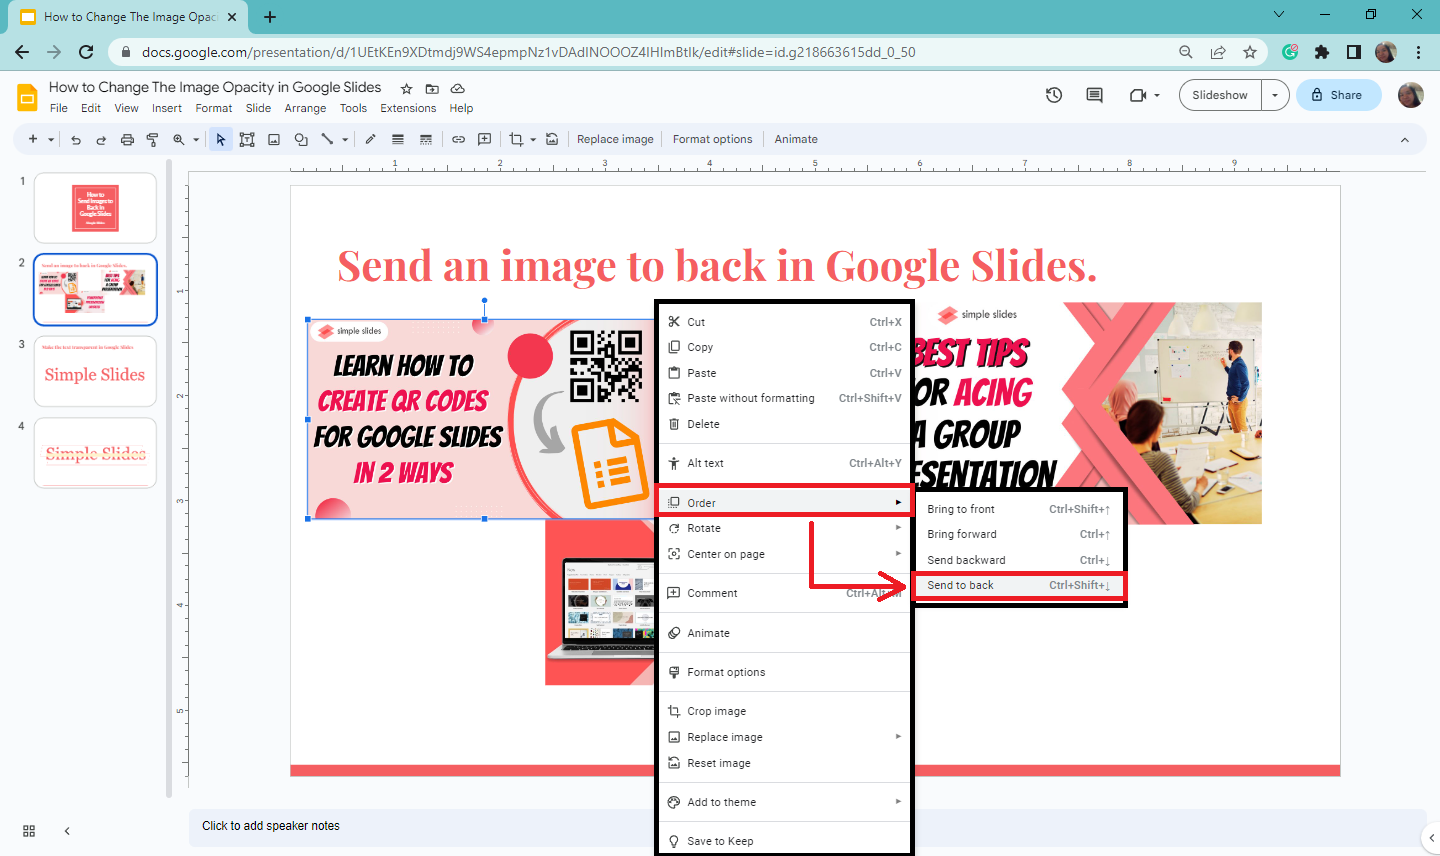 Then click "Send-to back" to send image at the back of slide.